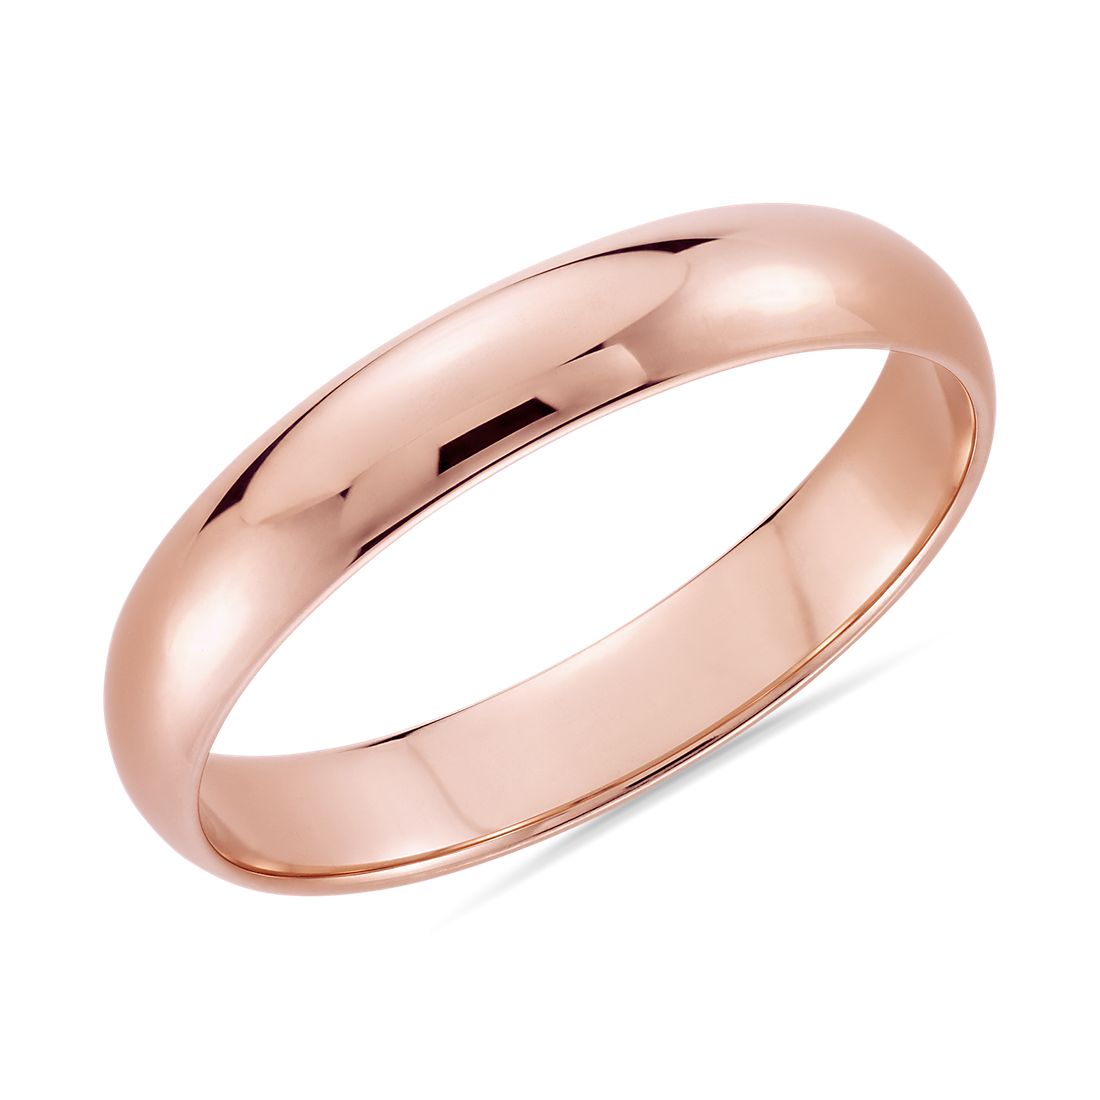 Classic Wedding Ring in 14k Rose Gold (4 mm)